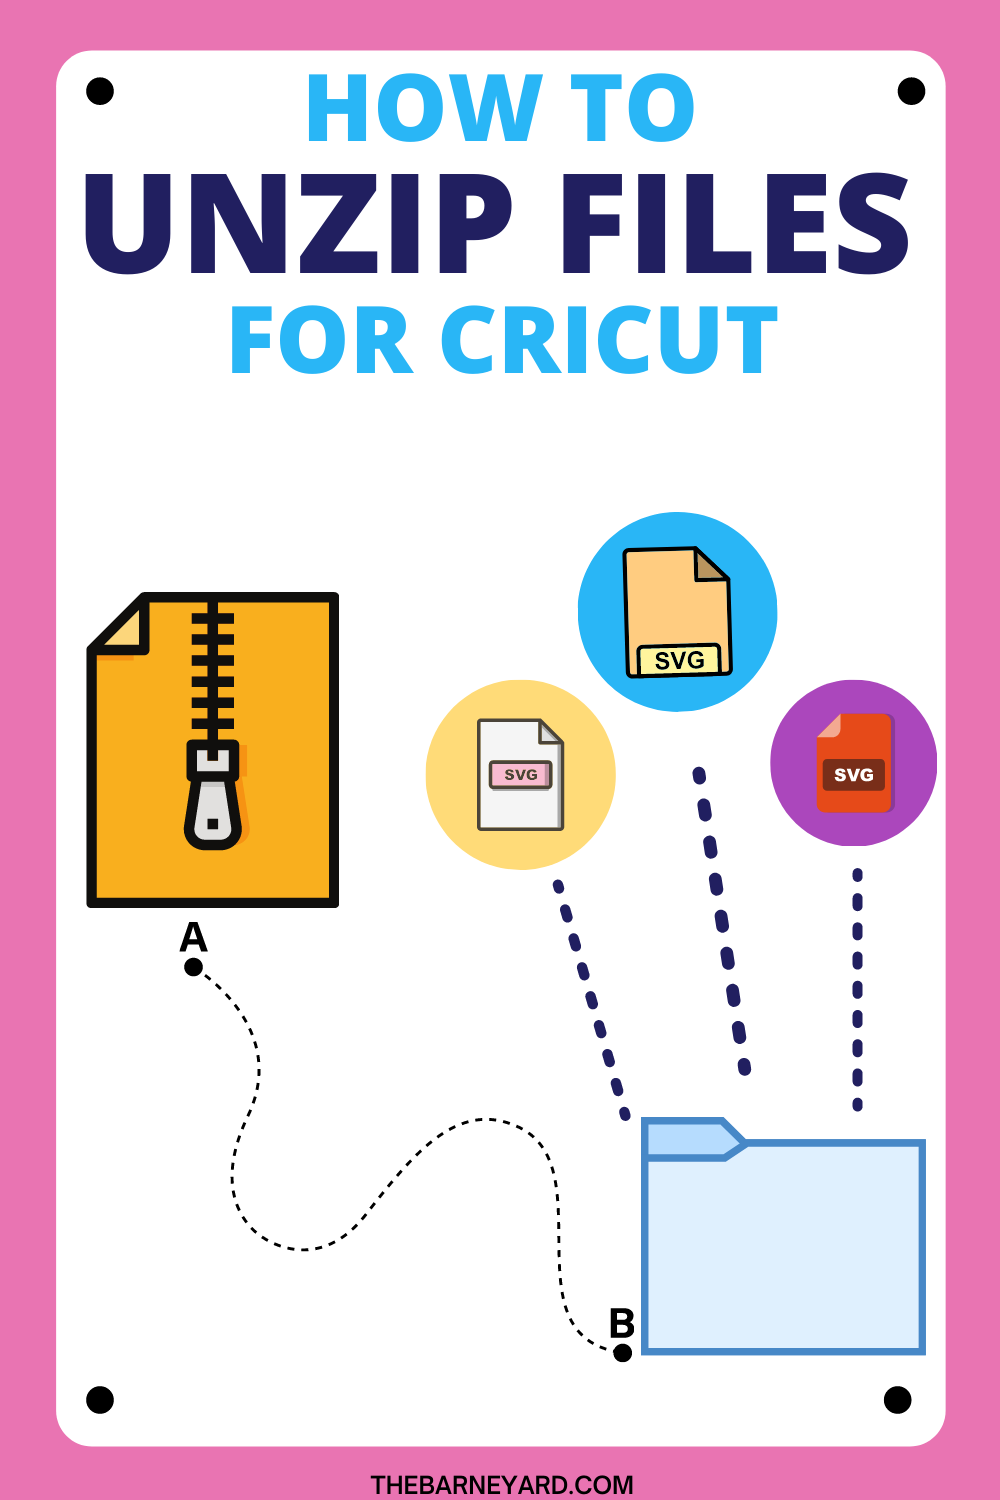 Download Zipped Folders How To Unzip Files For Cricut On A Mac The Barne Yard SVG, PNG, EPS, DXF File